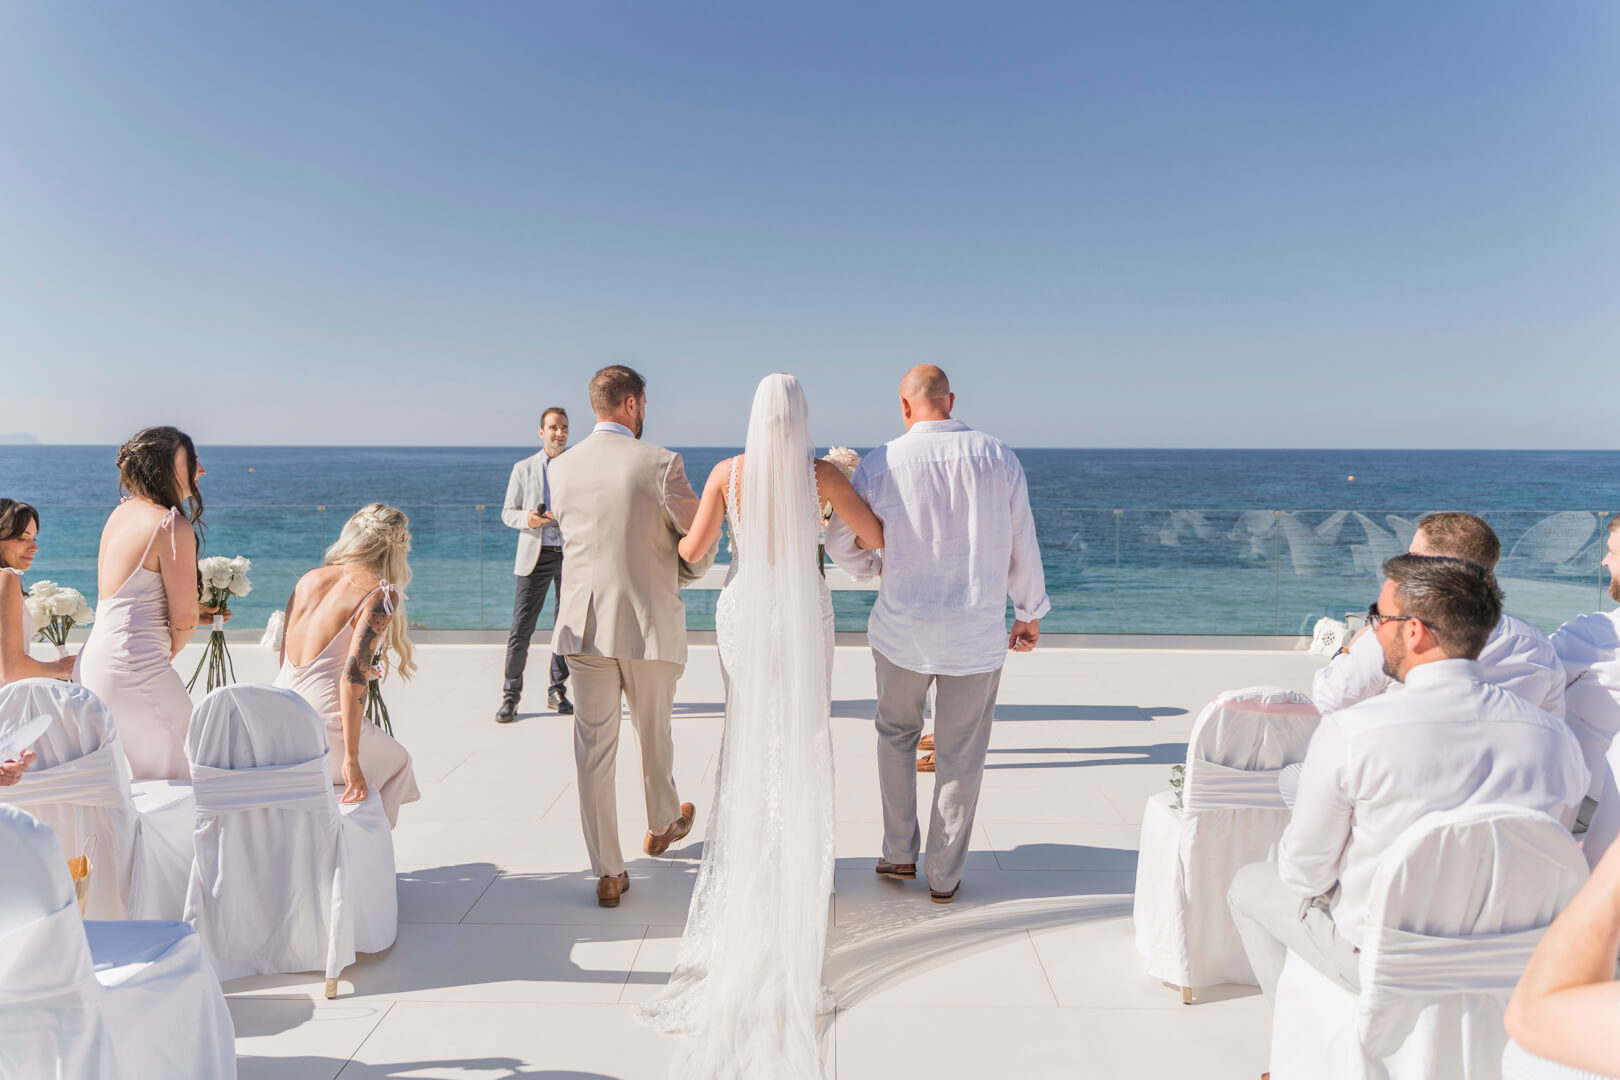 Ceremony in Luxme White Palace wedding venue with sea view